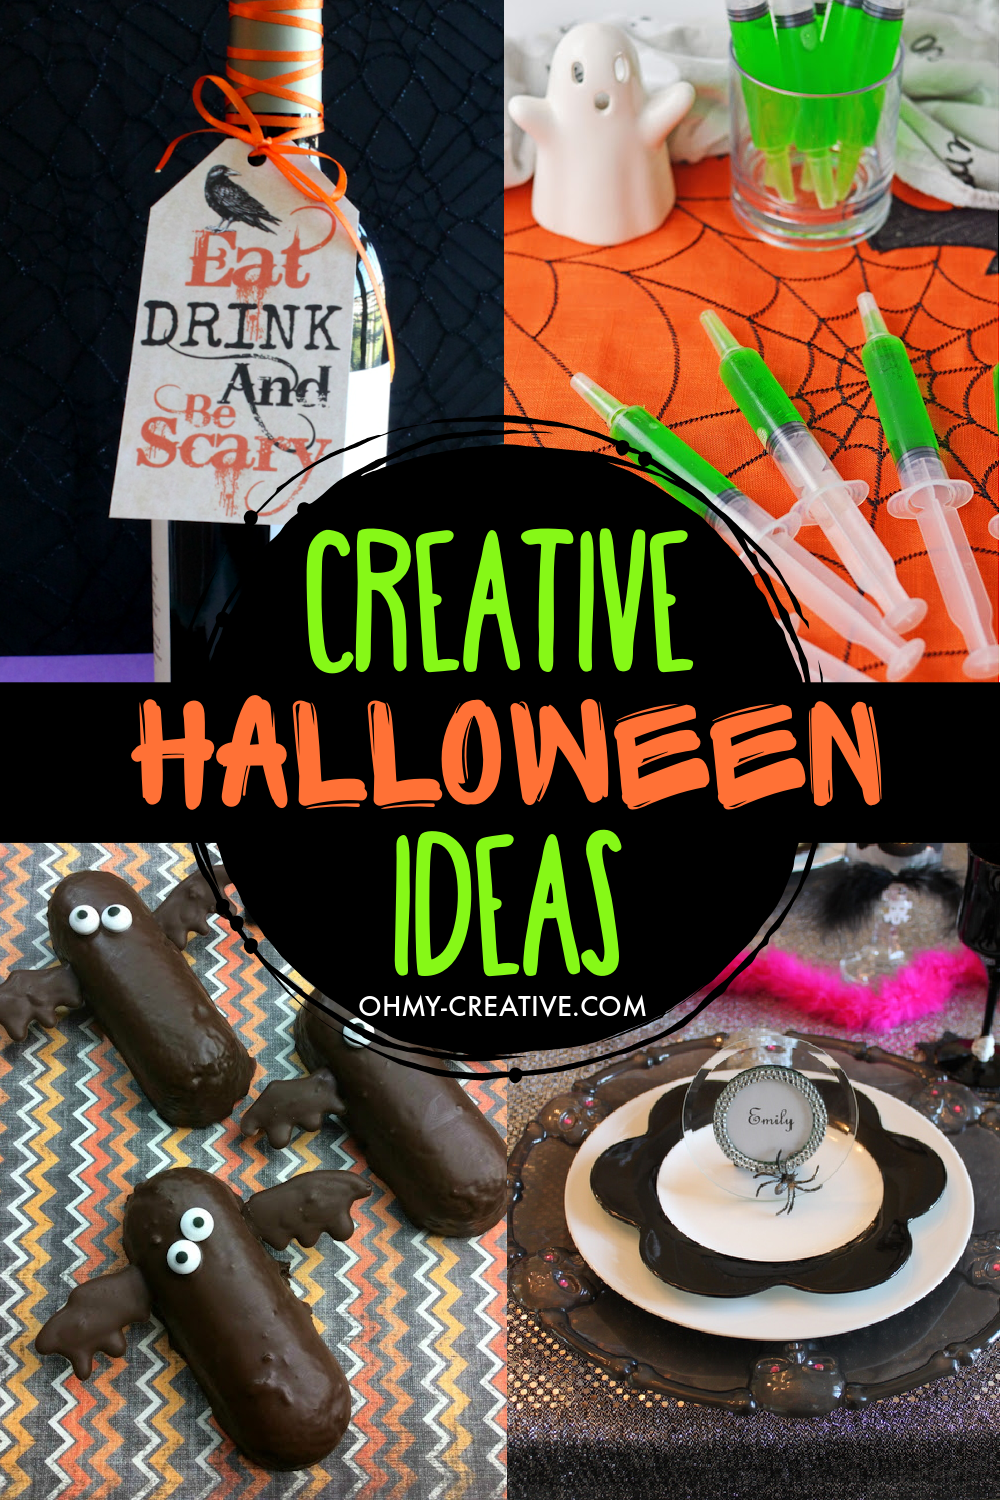 A pinterest collage of creative Halloween ideas including Halloween crafts, recipes, drinks and party ideas.